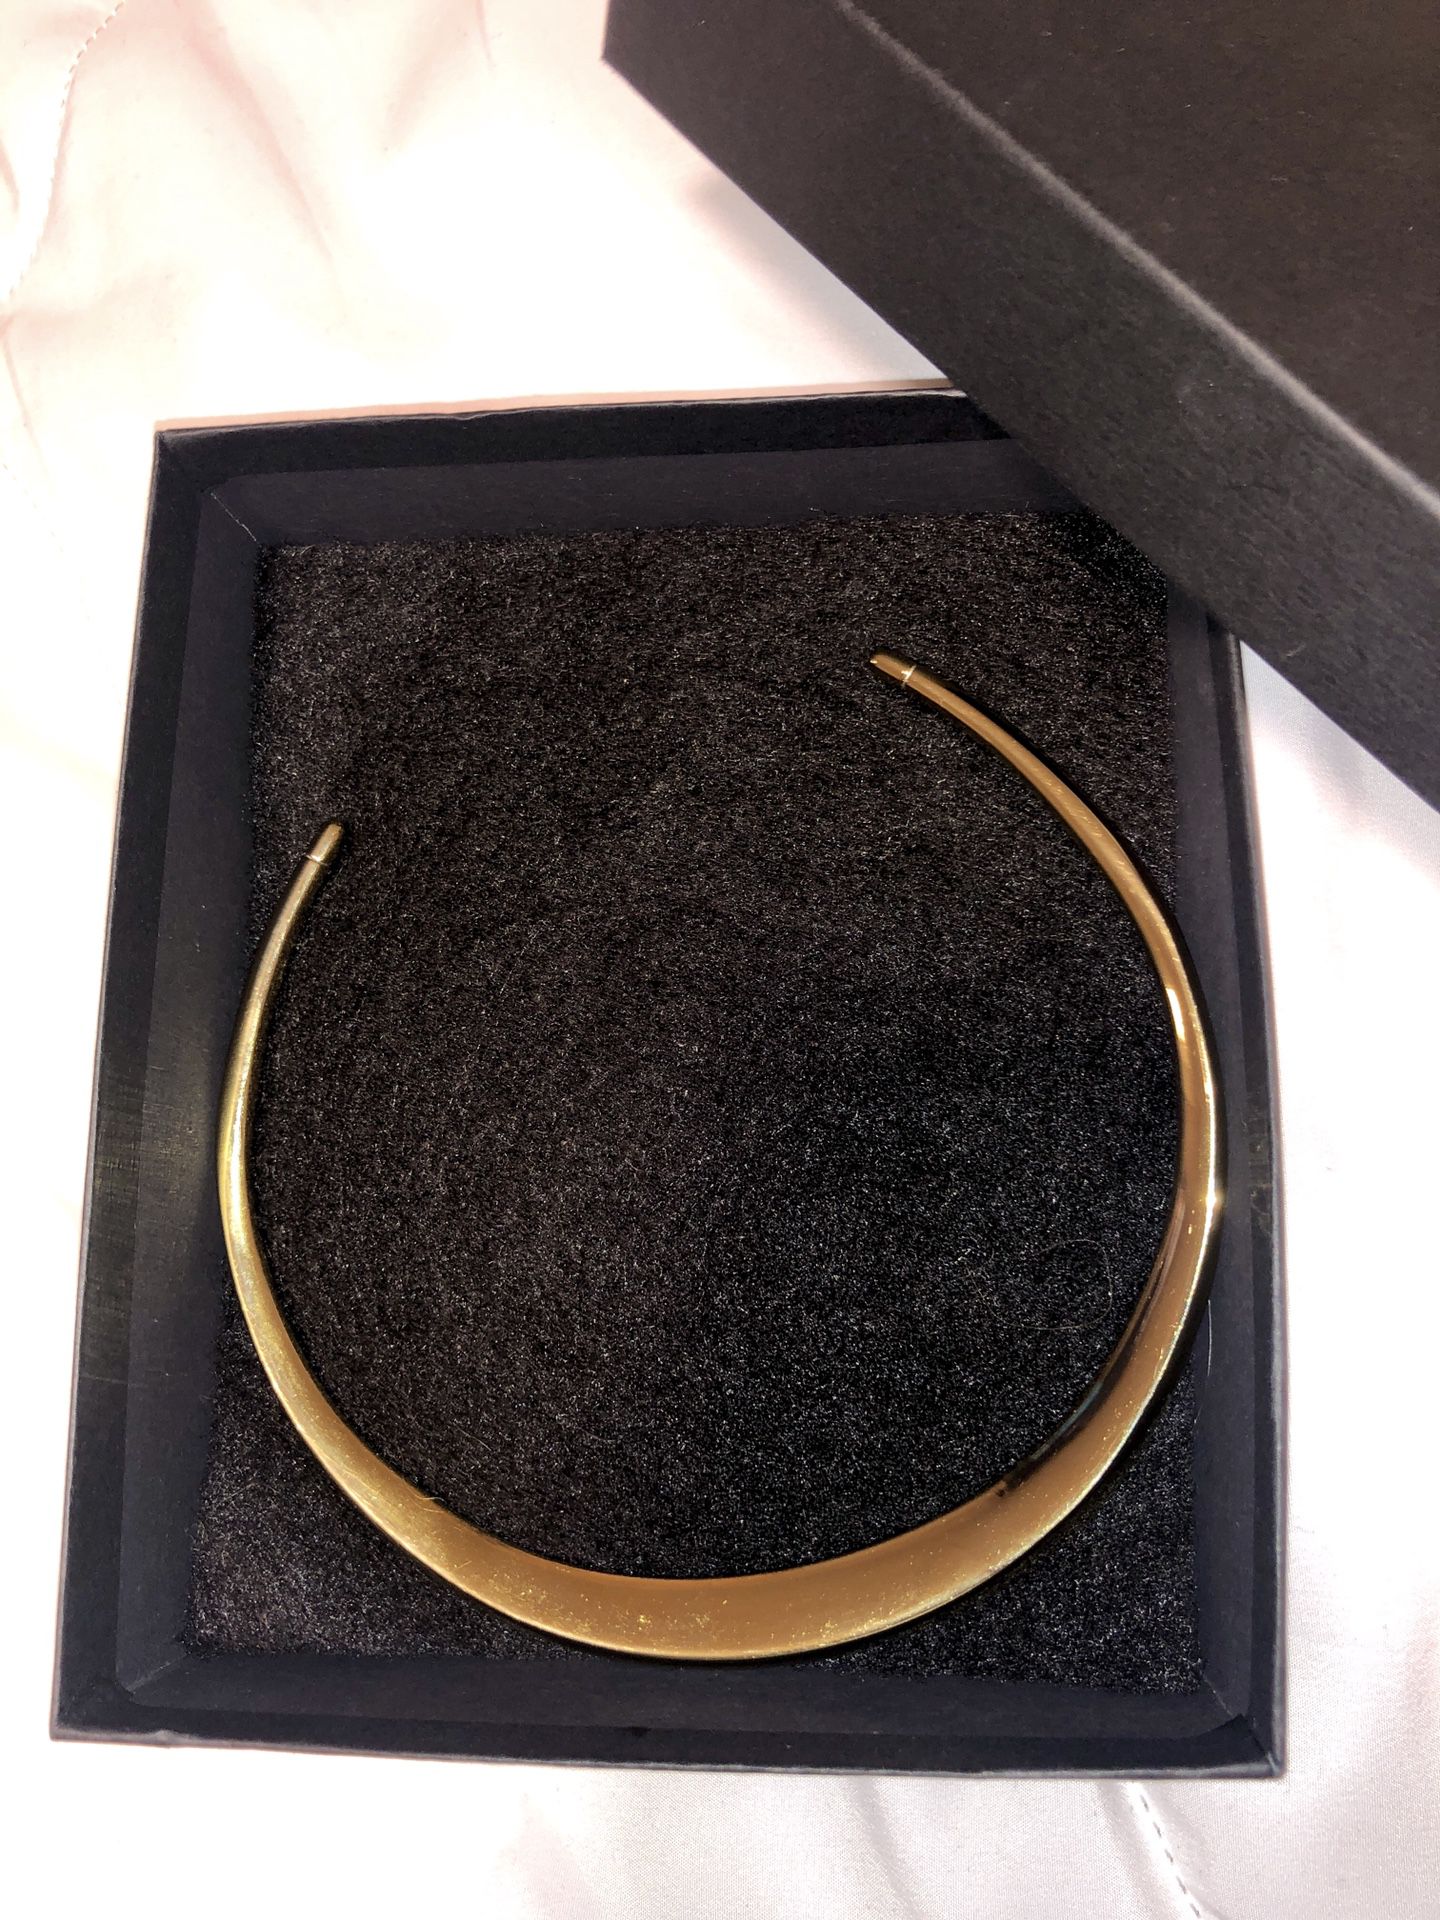 !MUST GO GIVE ME YOUR BEST OFFER! Necklace gold (MICHAEL KORS) fits anybody used great condition comes with a black box